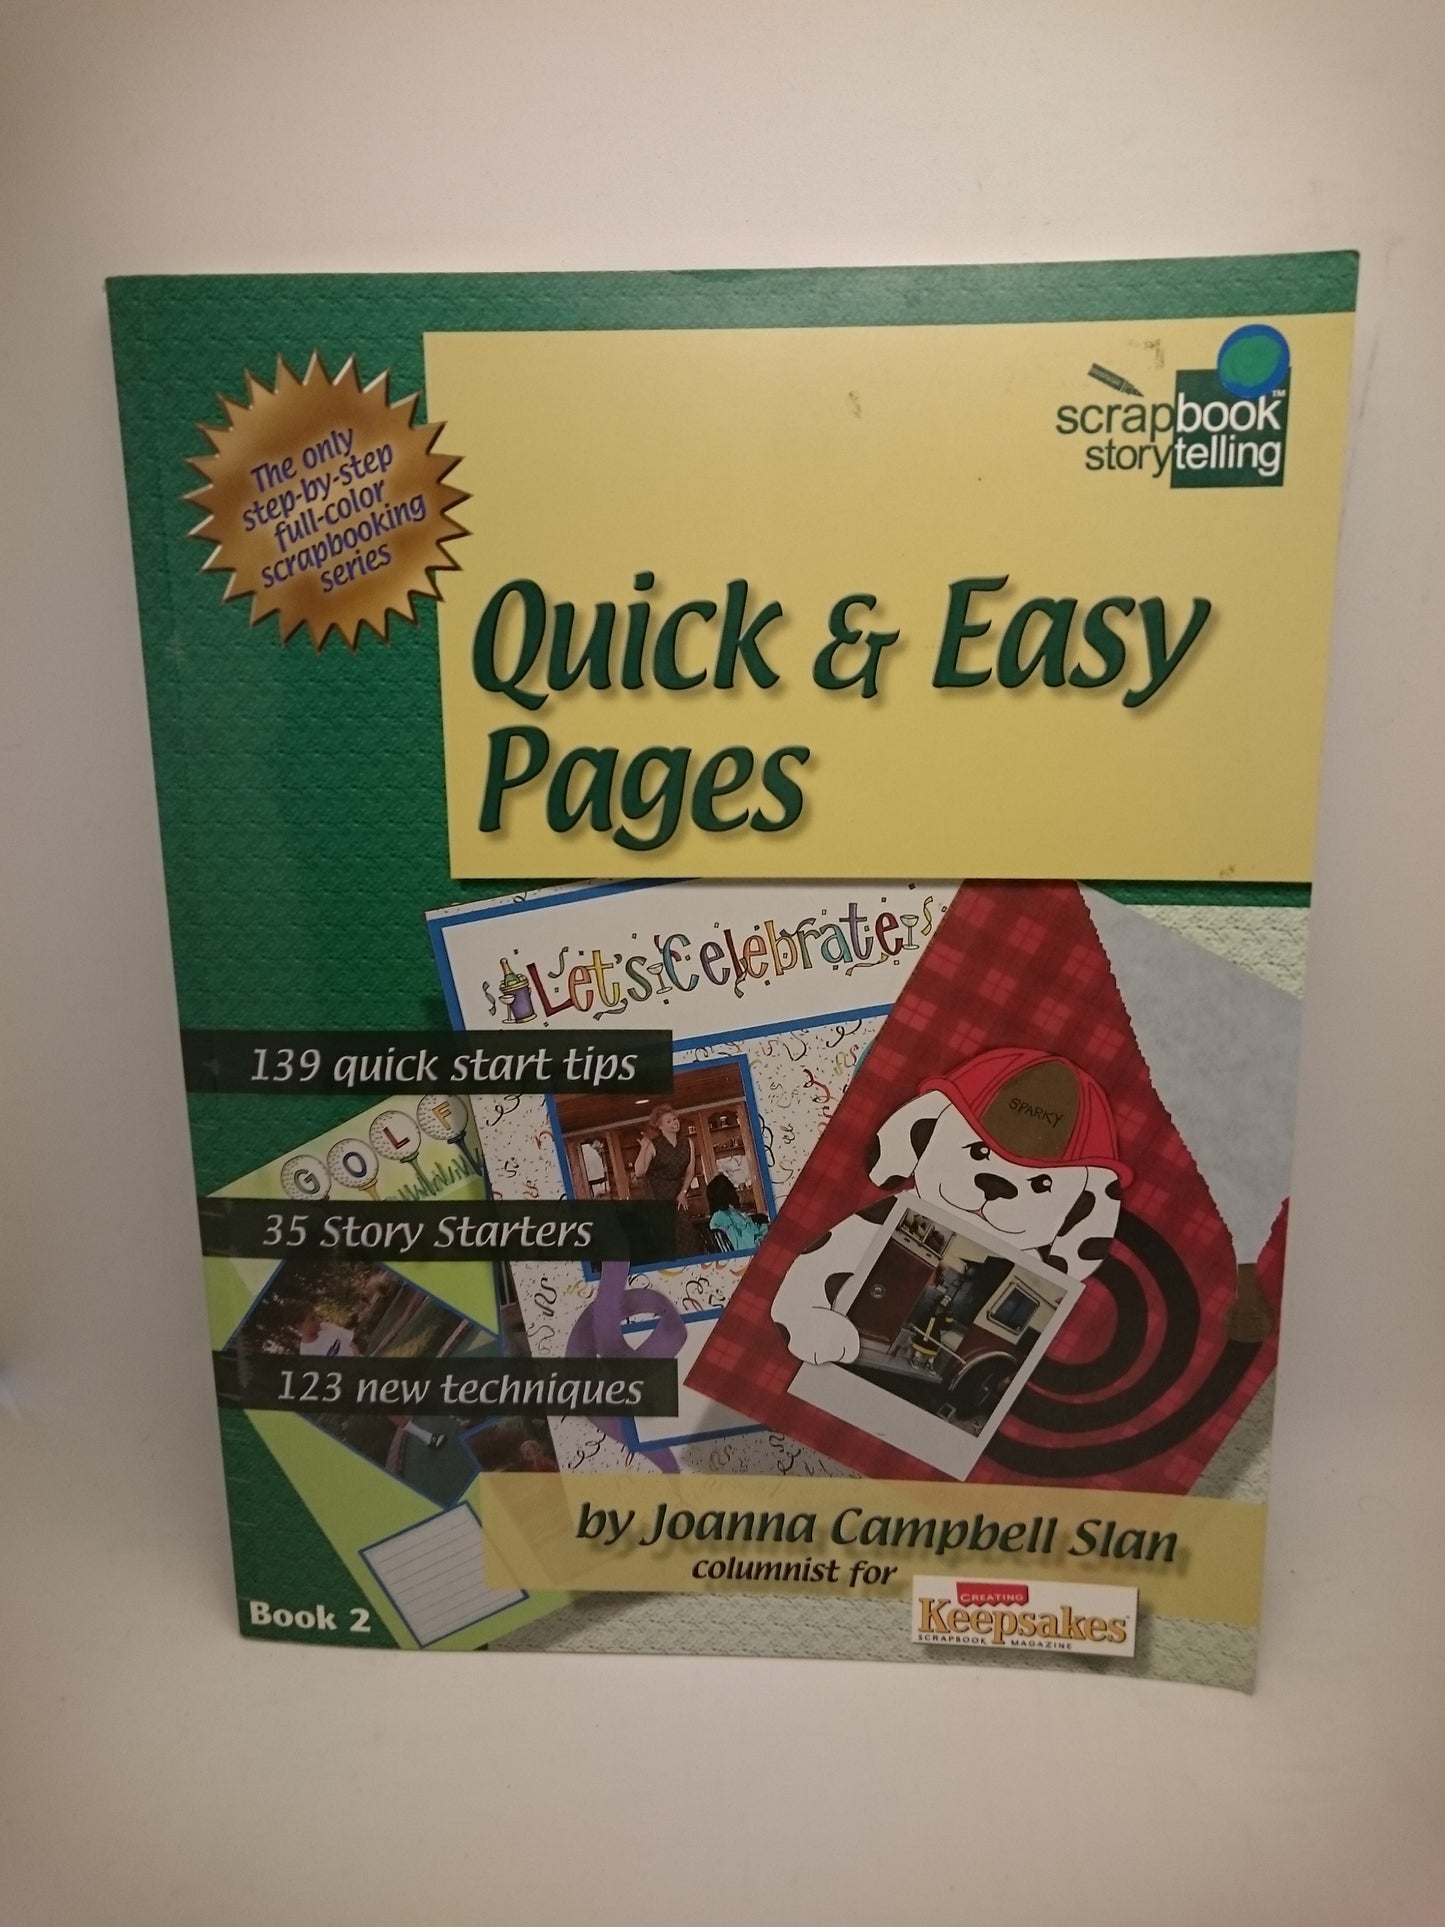 Quick & Easy Pages